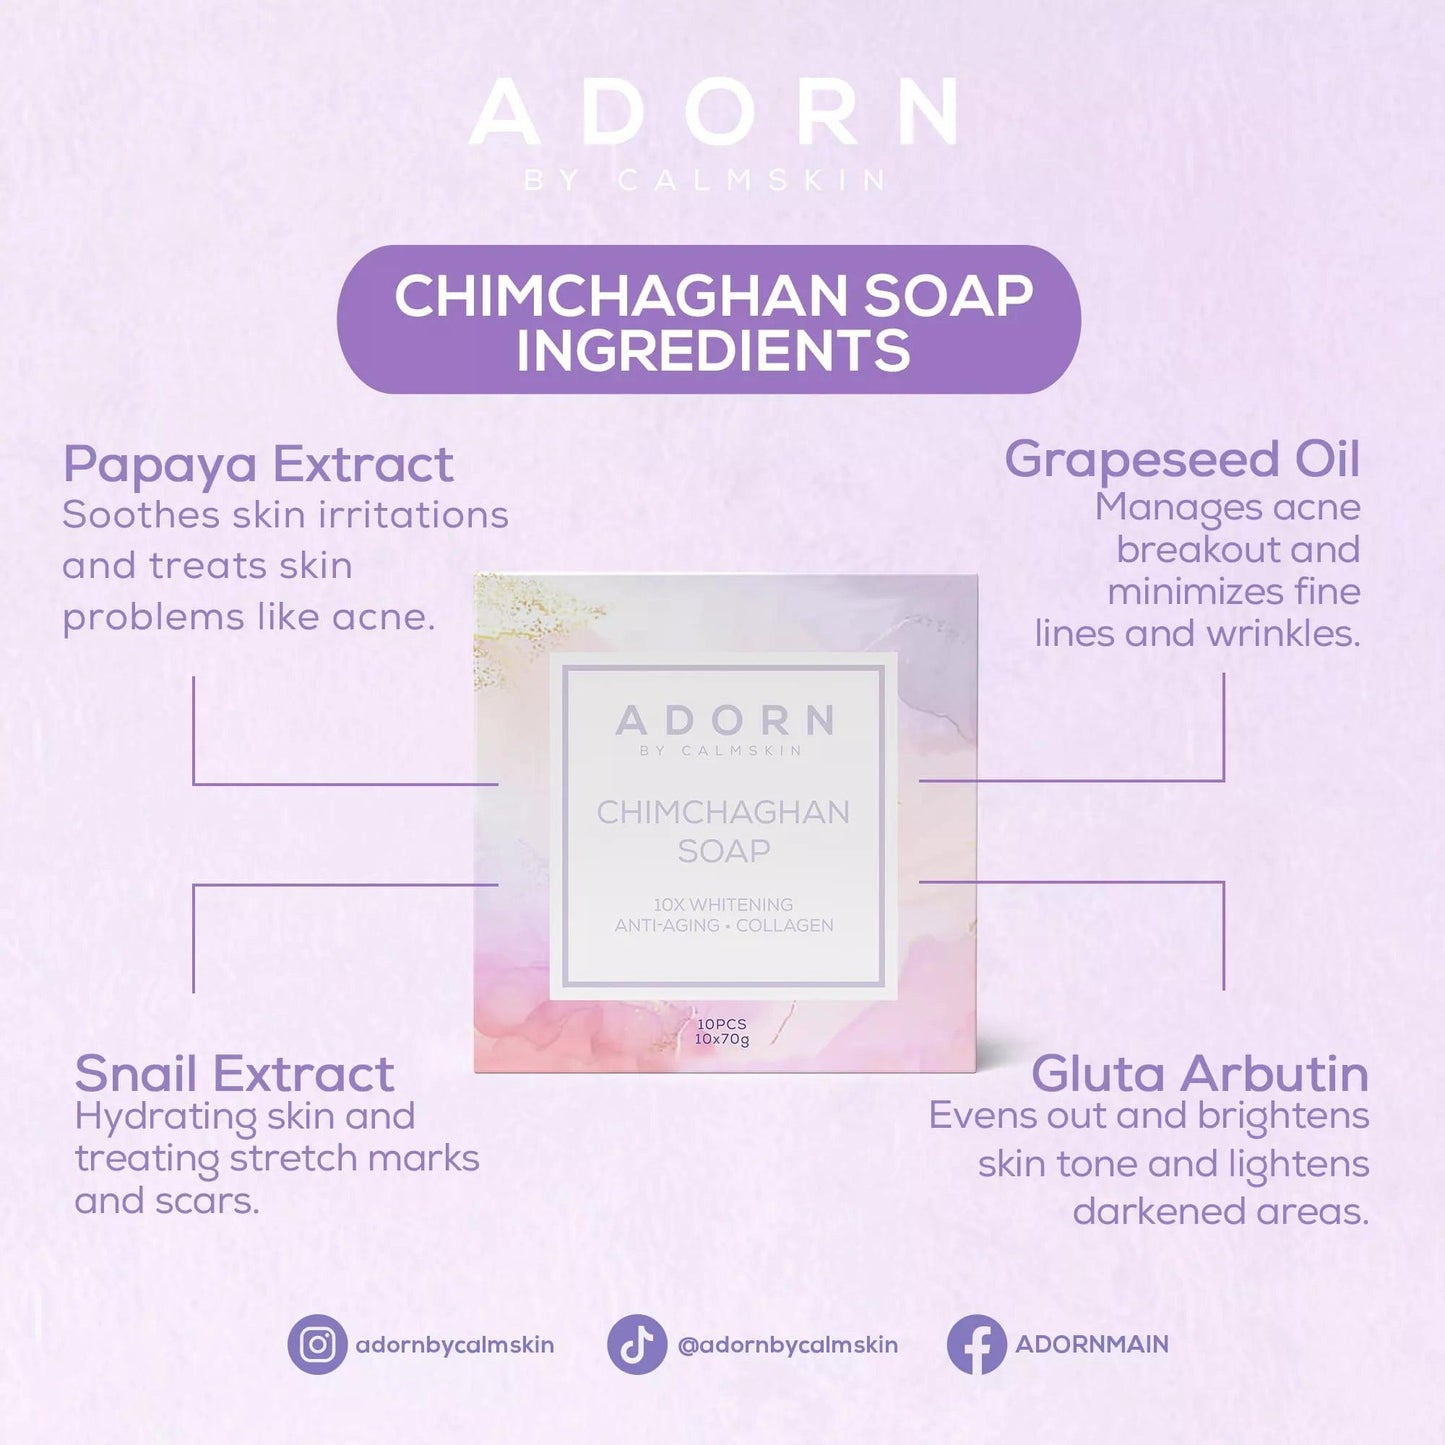 ADORN Chimchaghan Soap by Calmskin - Astrid & Rose